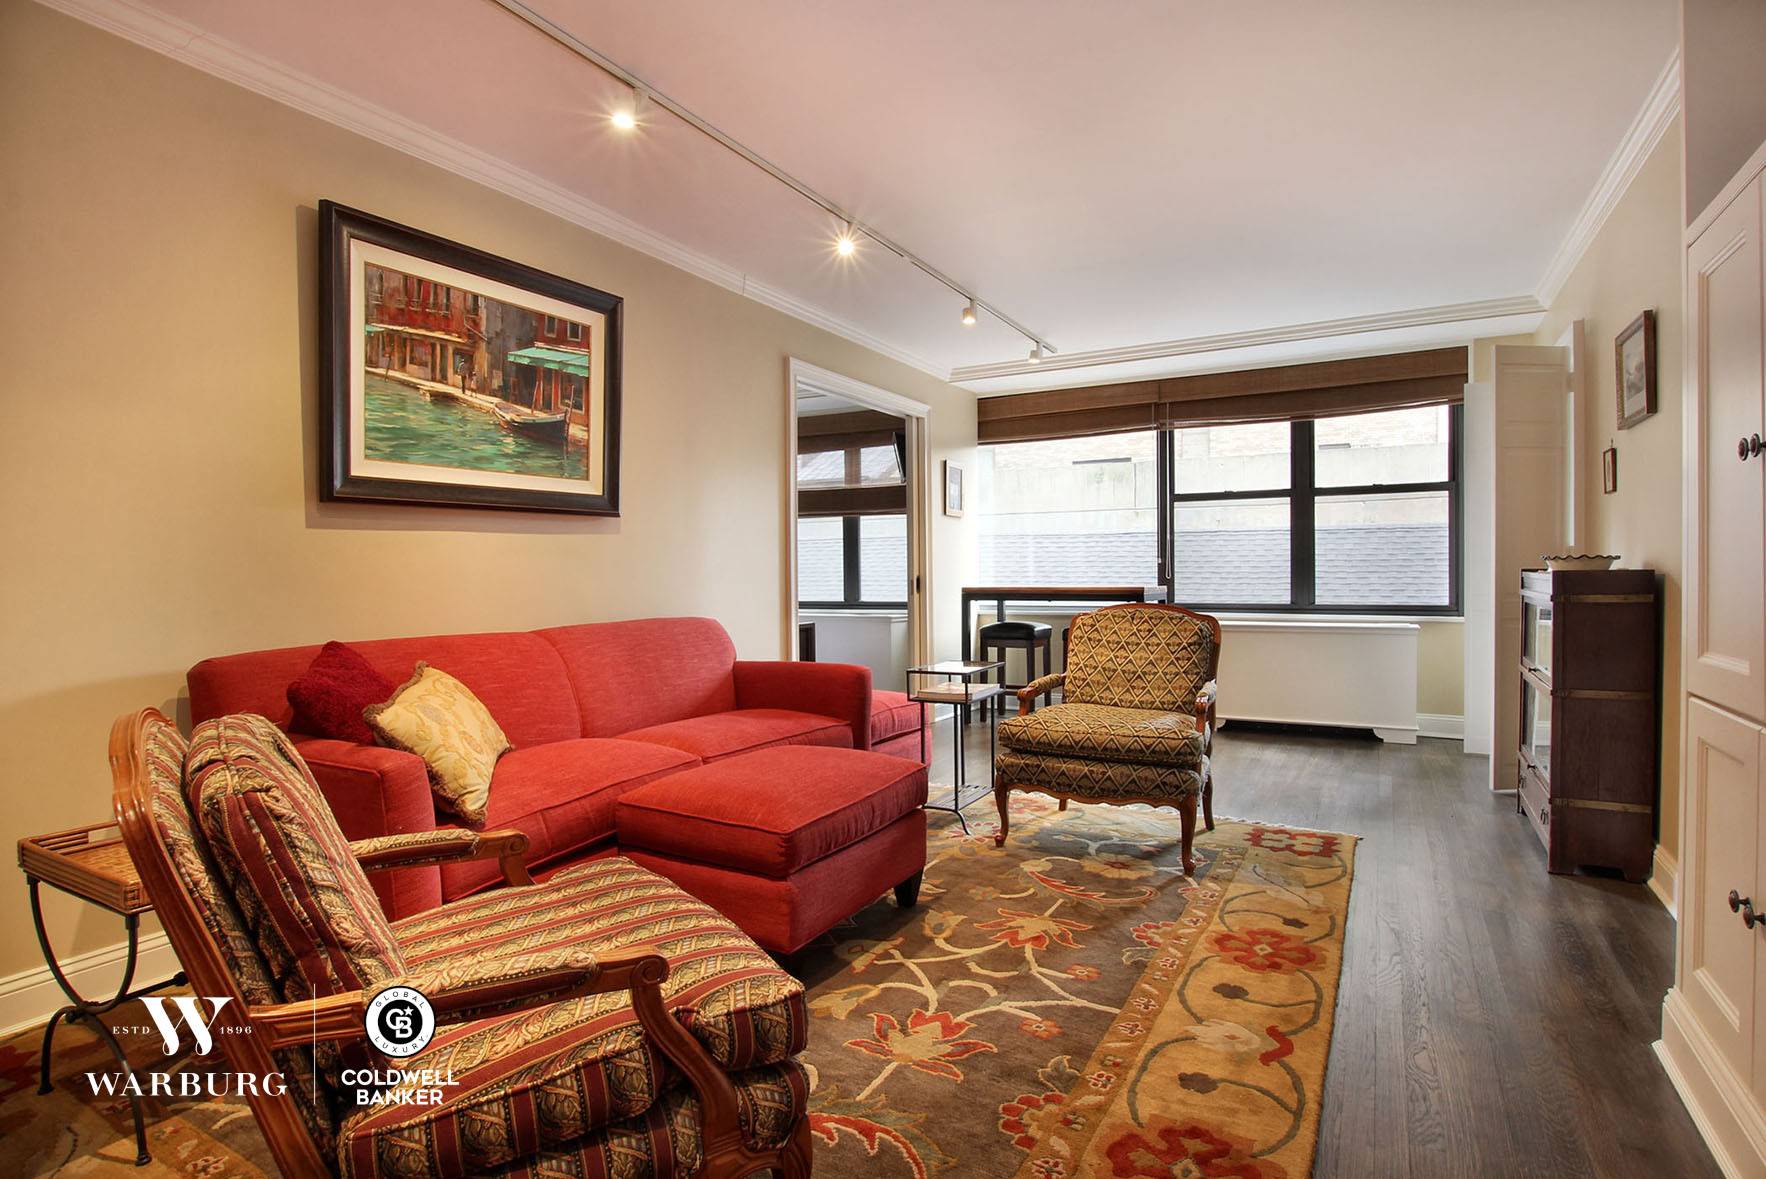 Move right into this fully renovated one bedroom home.